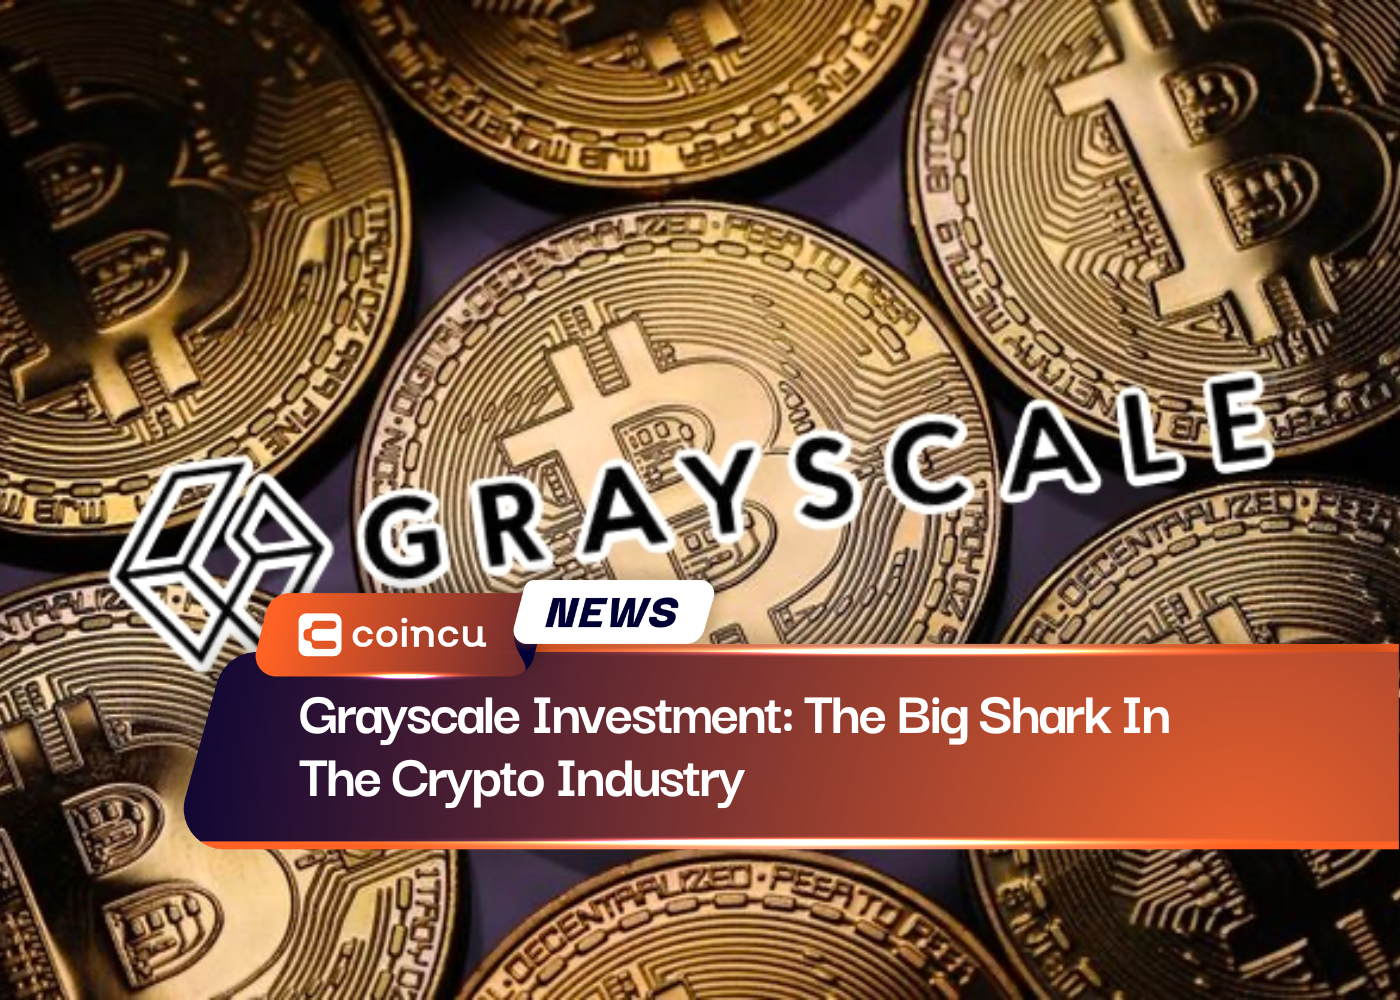 Grayscale Investment: The Big Shark In The Crypto Industry